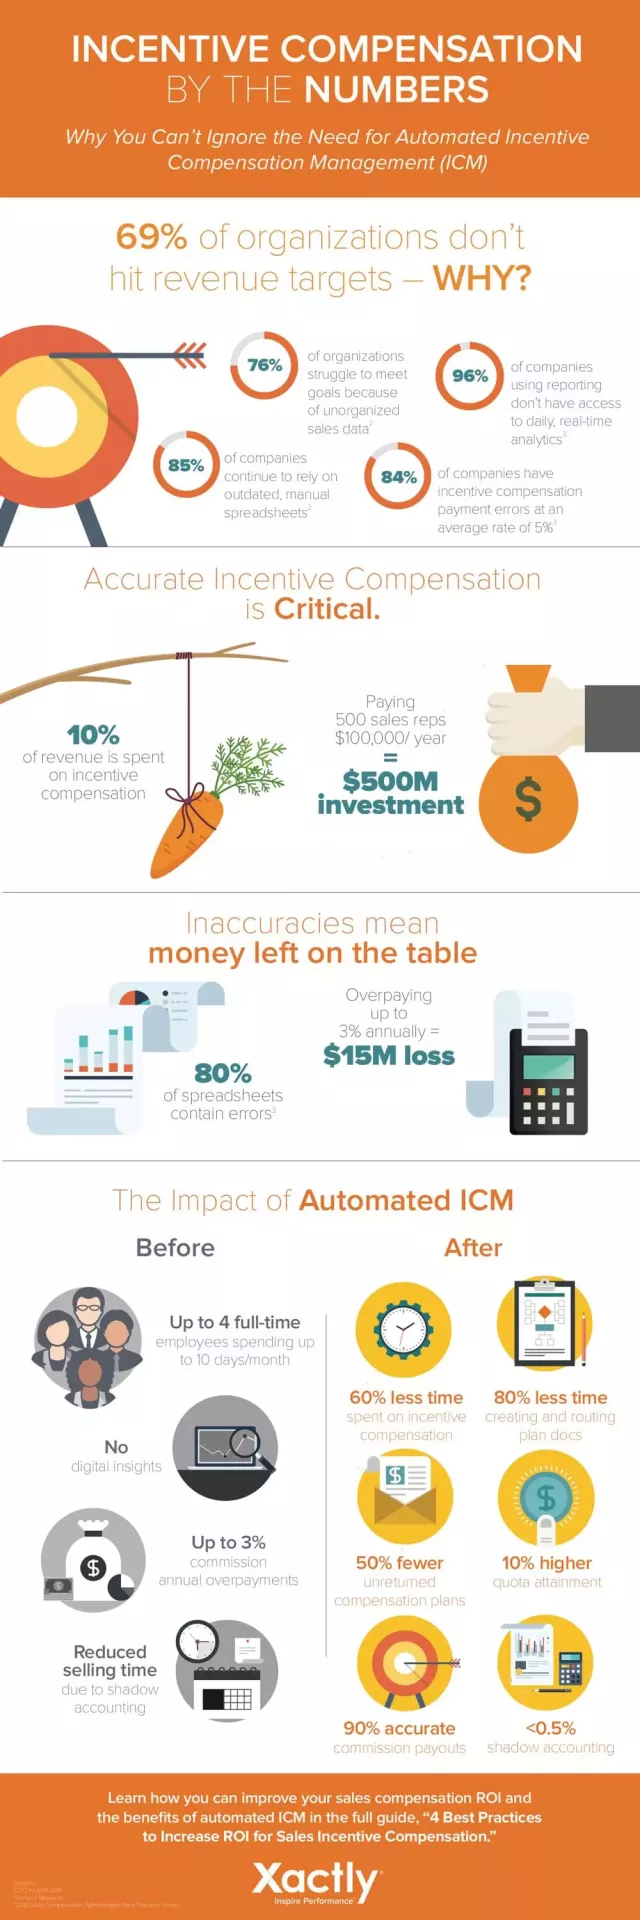 Incentive Compensation by the Numbers Infographic